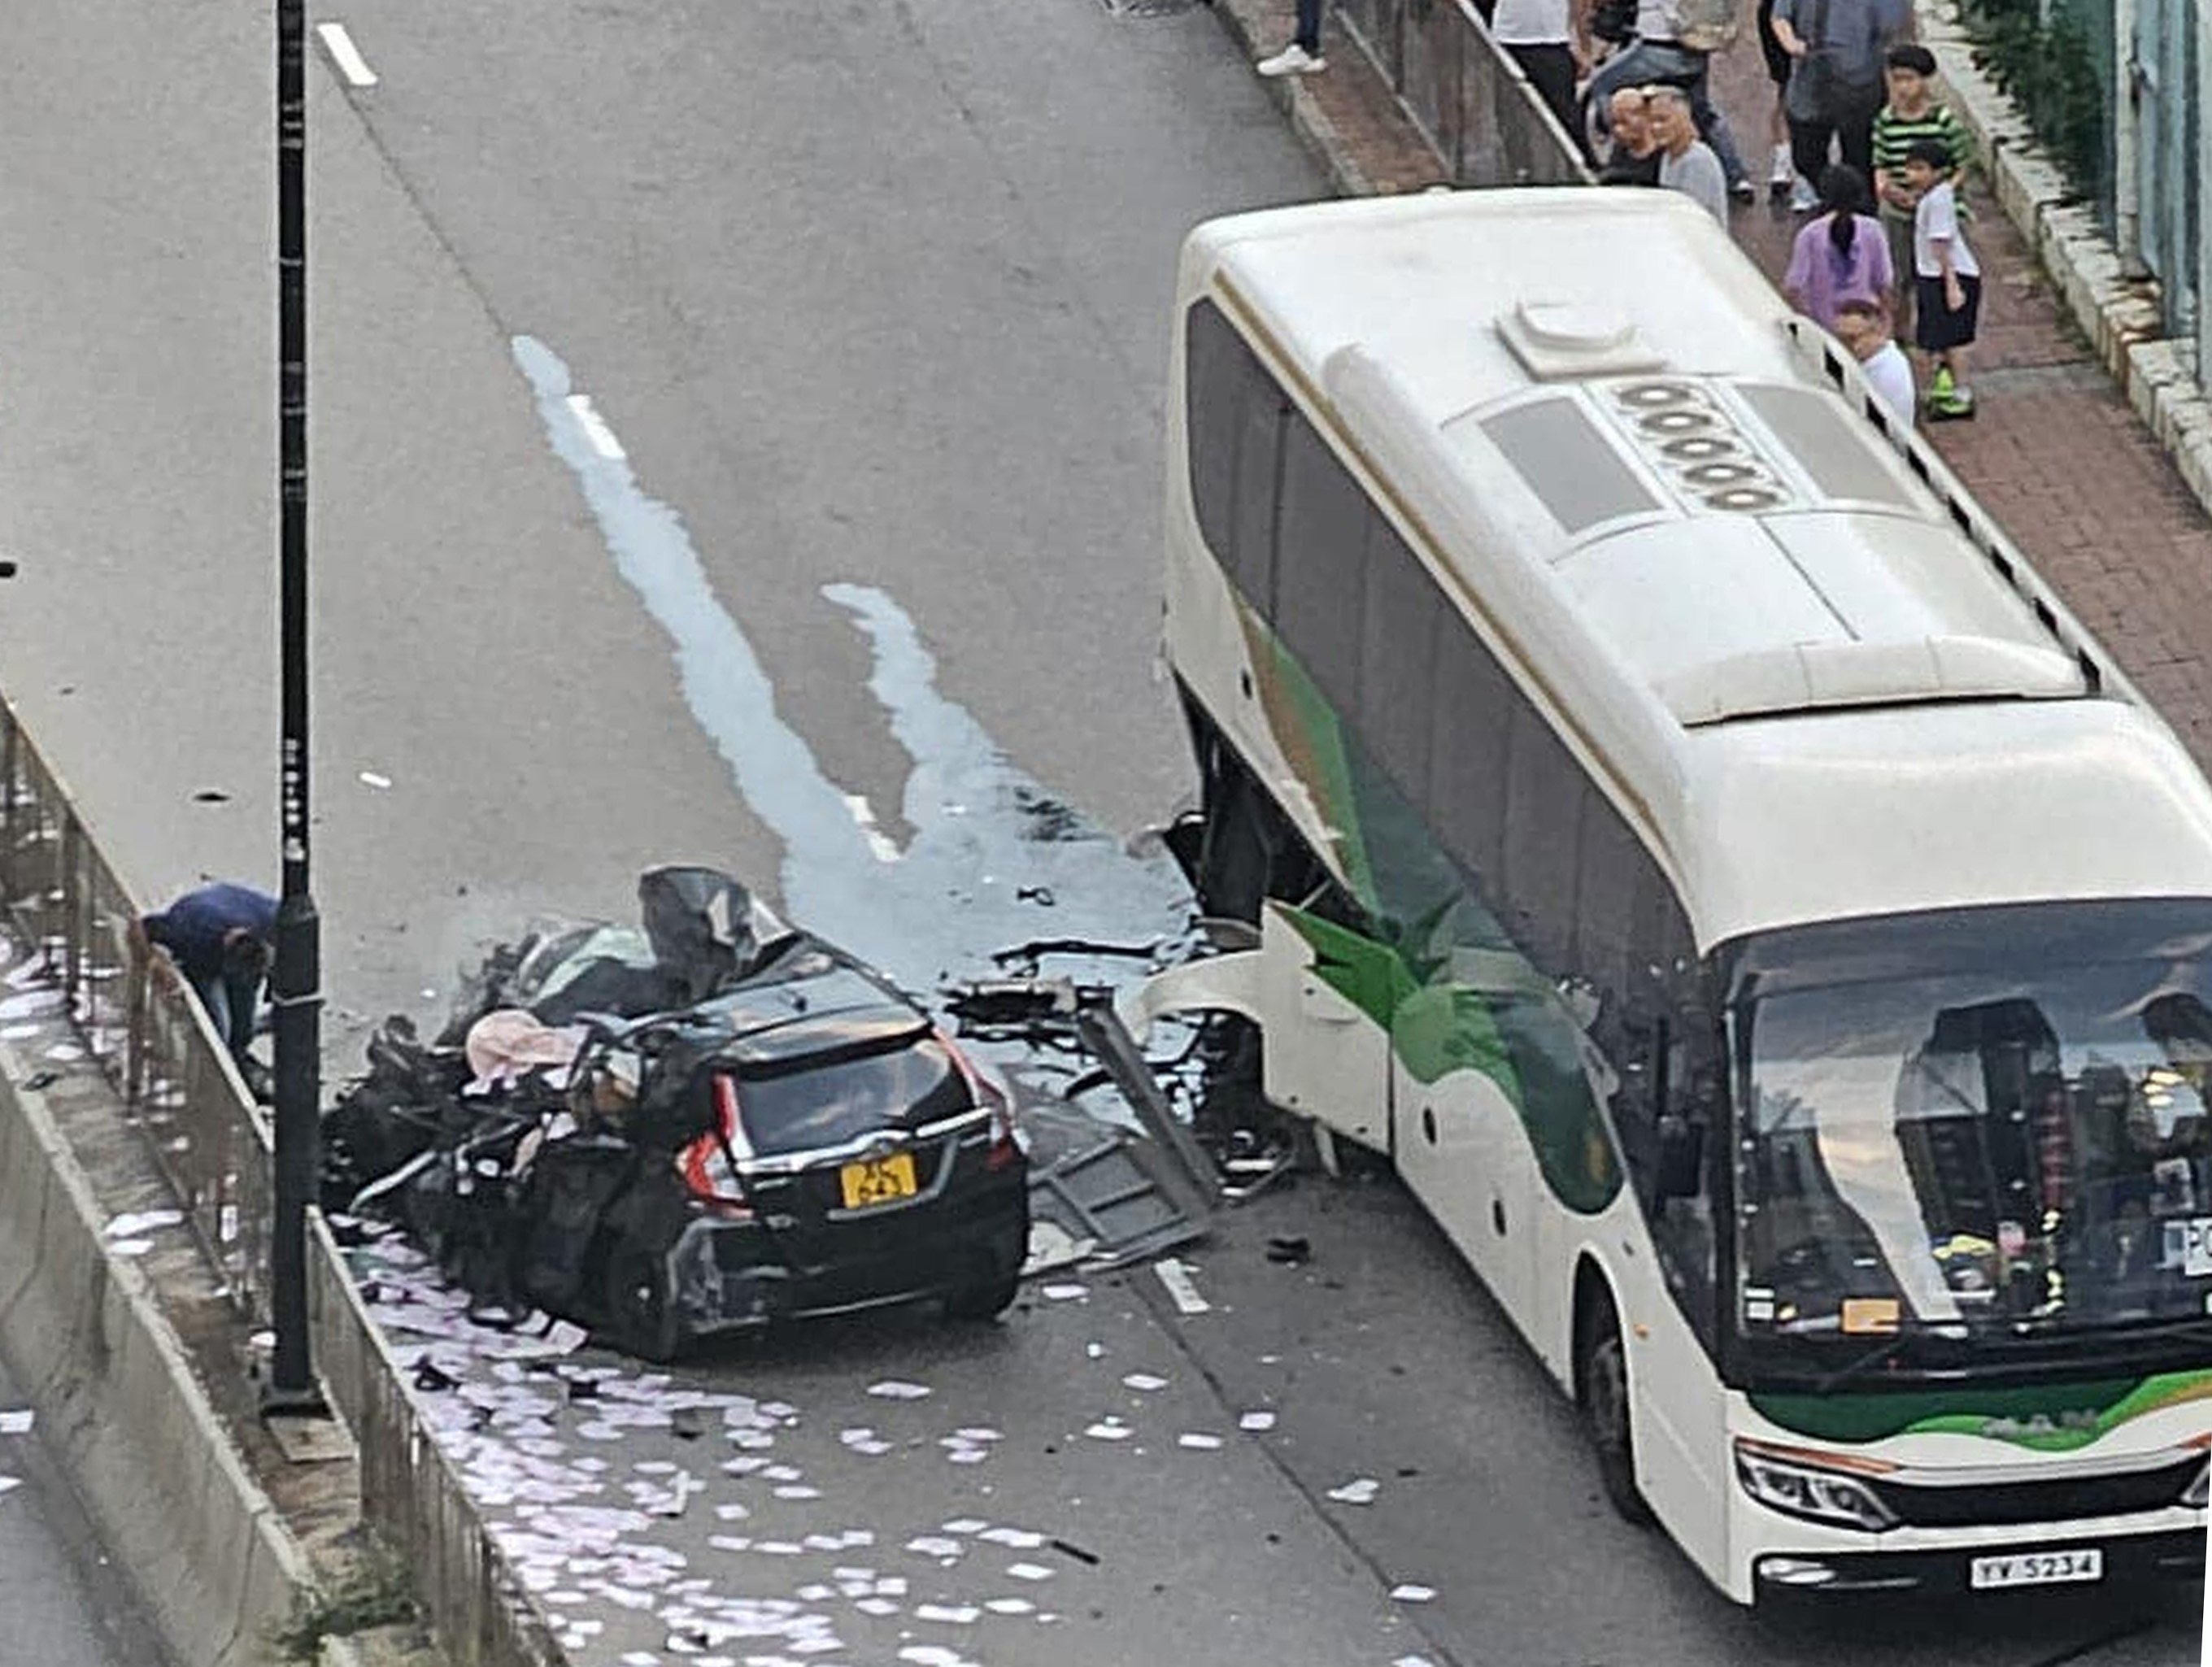 The wreckage of a car after it and a tour bus were in collision near Kwai Chung Sports Ground. Photo: Handout